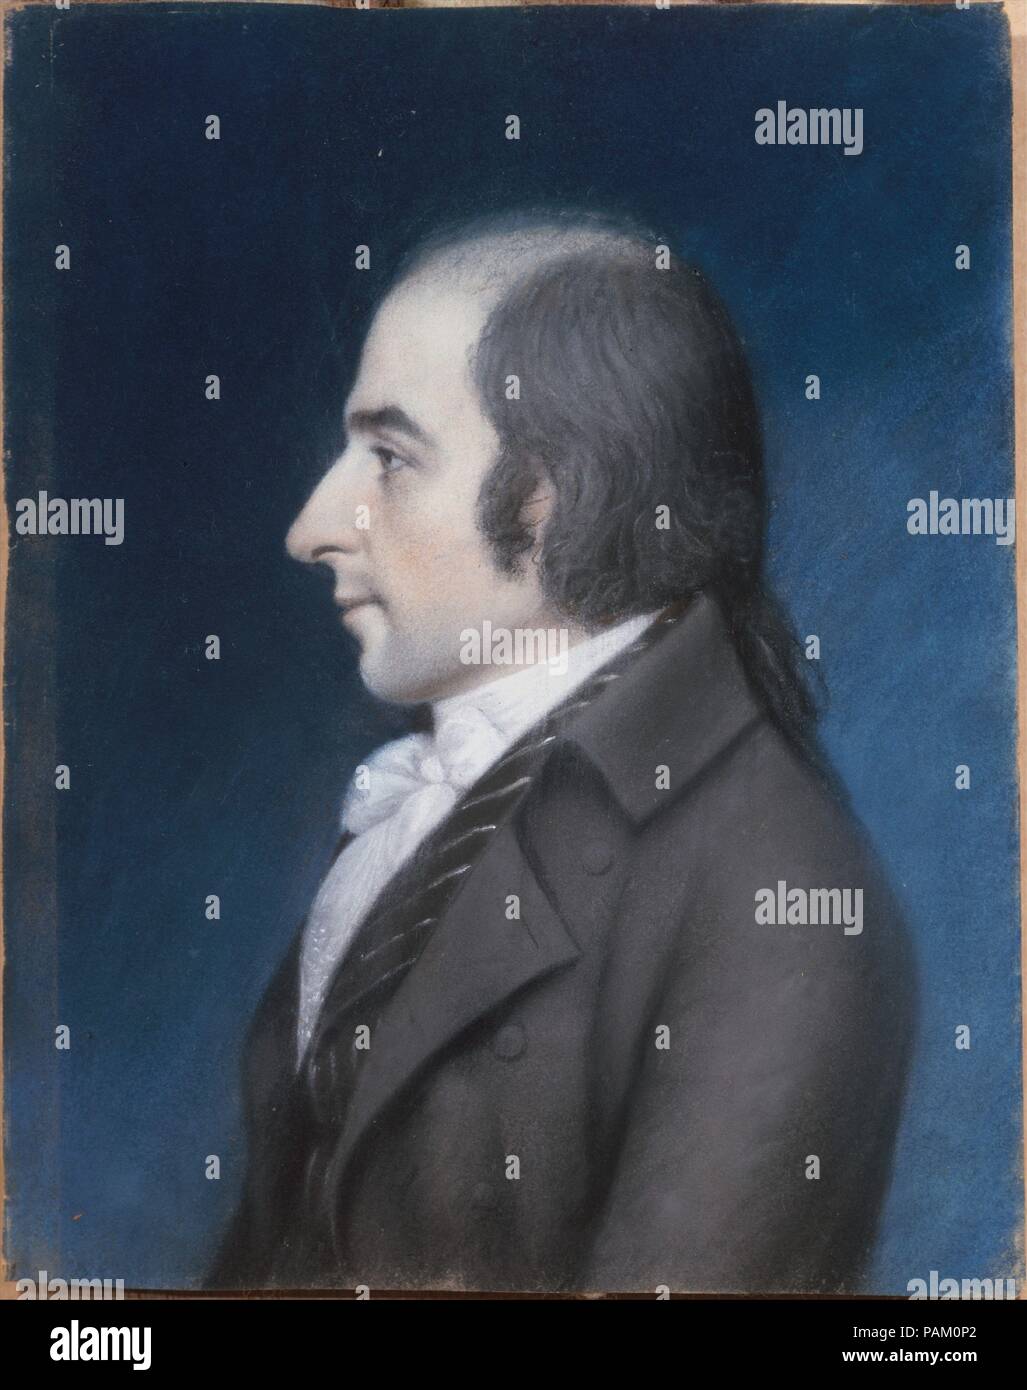 Albert Gallatin. Artist: James Sharples (ca. 1751-1811). Dimensions: 9 3/8 x 7 3/8 in. (23.8 x 18.7 cm). Date: ca. 1796.  The popularity of profile portraits, which ultimately derived from classical medallions honoring famous men of the republics of Greece and Rome, burgeoned during America's Federal period. The English painter and pastelist James Sharples established a career in America in 1794 by asking local and national politicians to sit for profiles and then enticing them into commissioning one or more copies of the completed portraits. Perhaps with some exceptions, Sharples employed a p Stock Photo